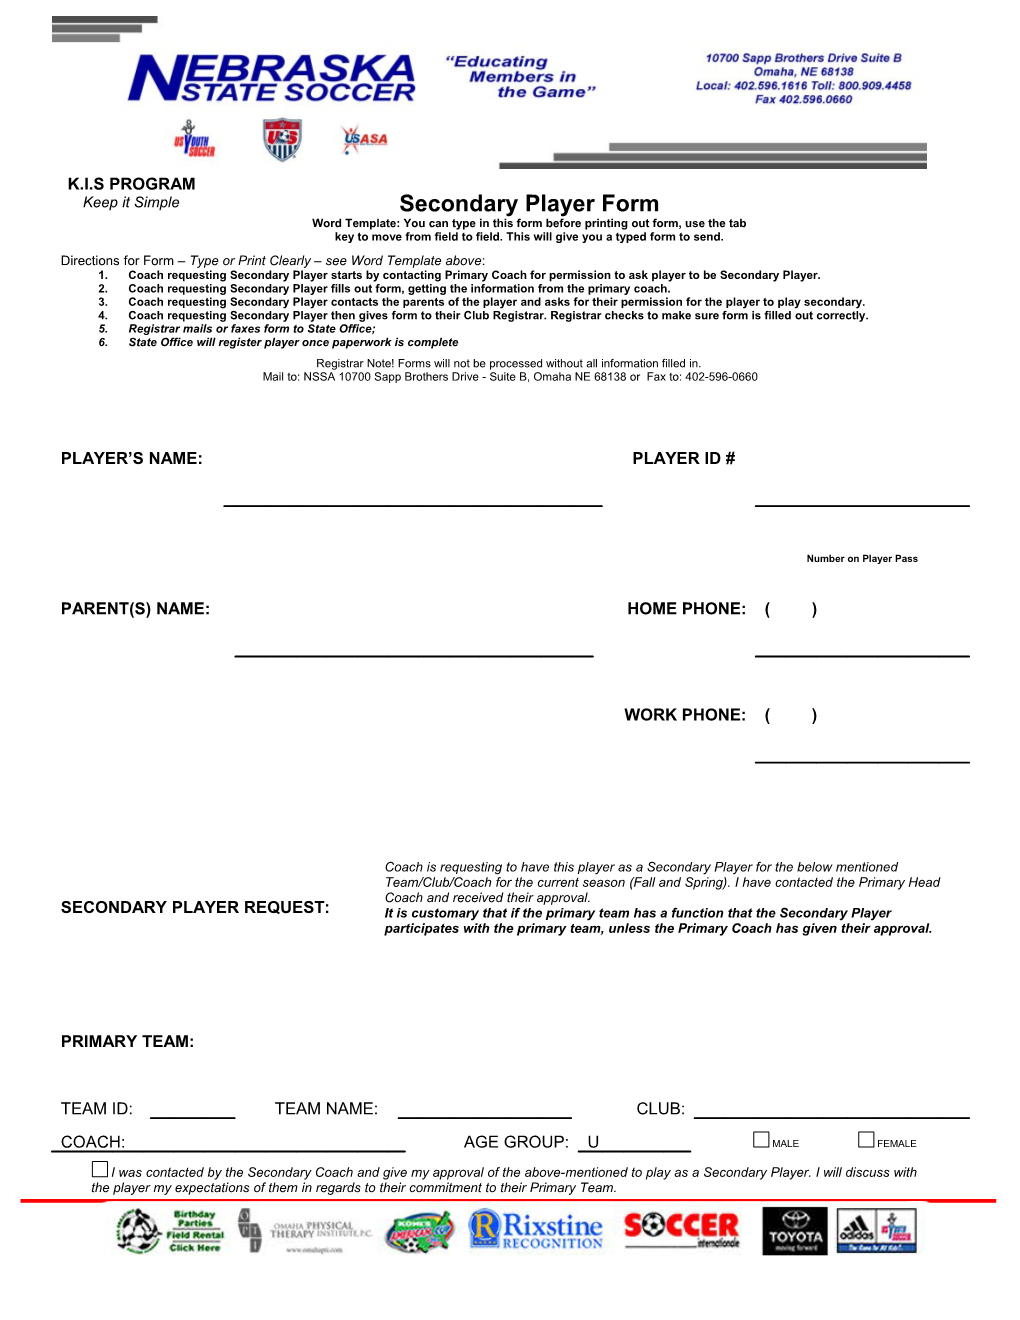 Secondary Player Form